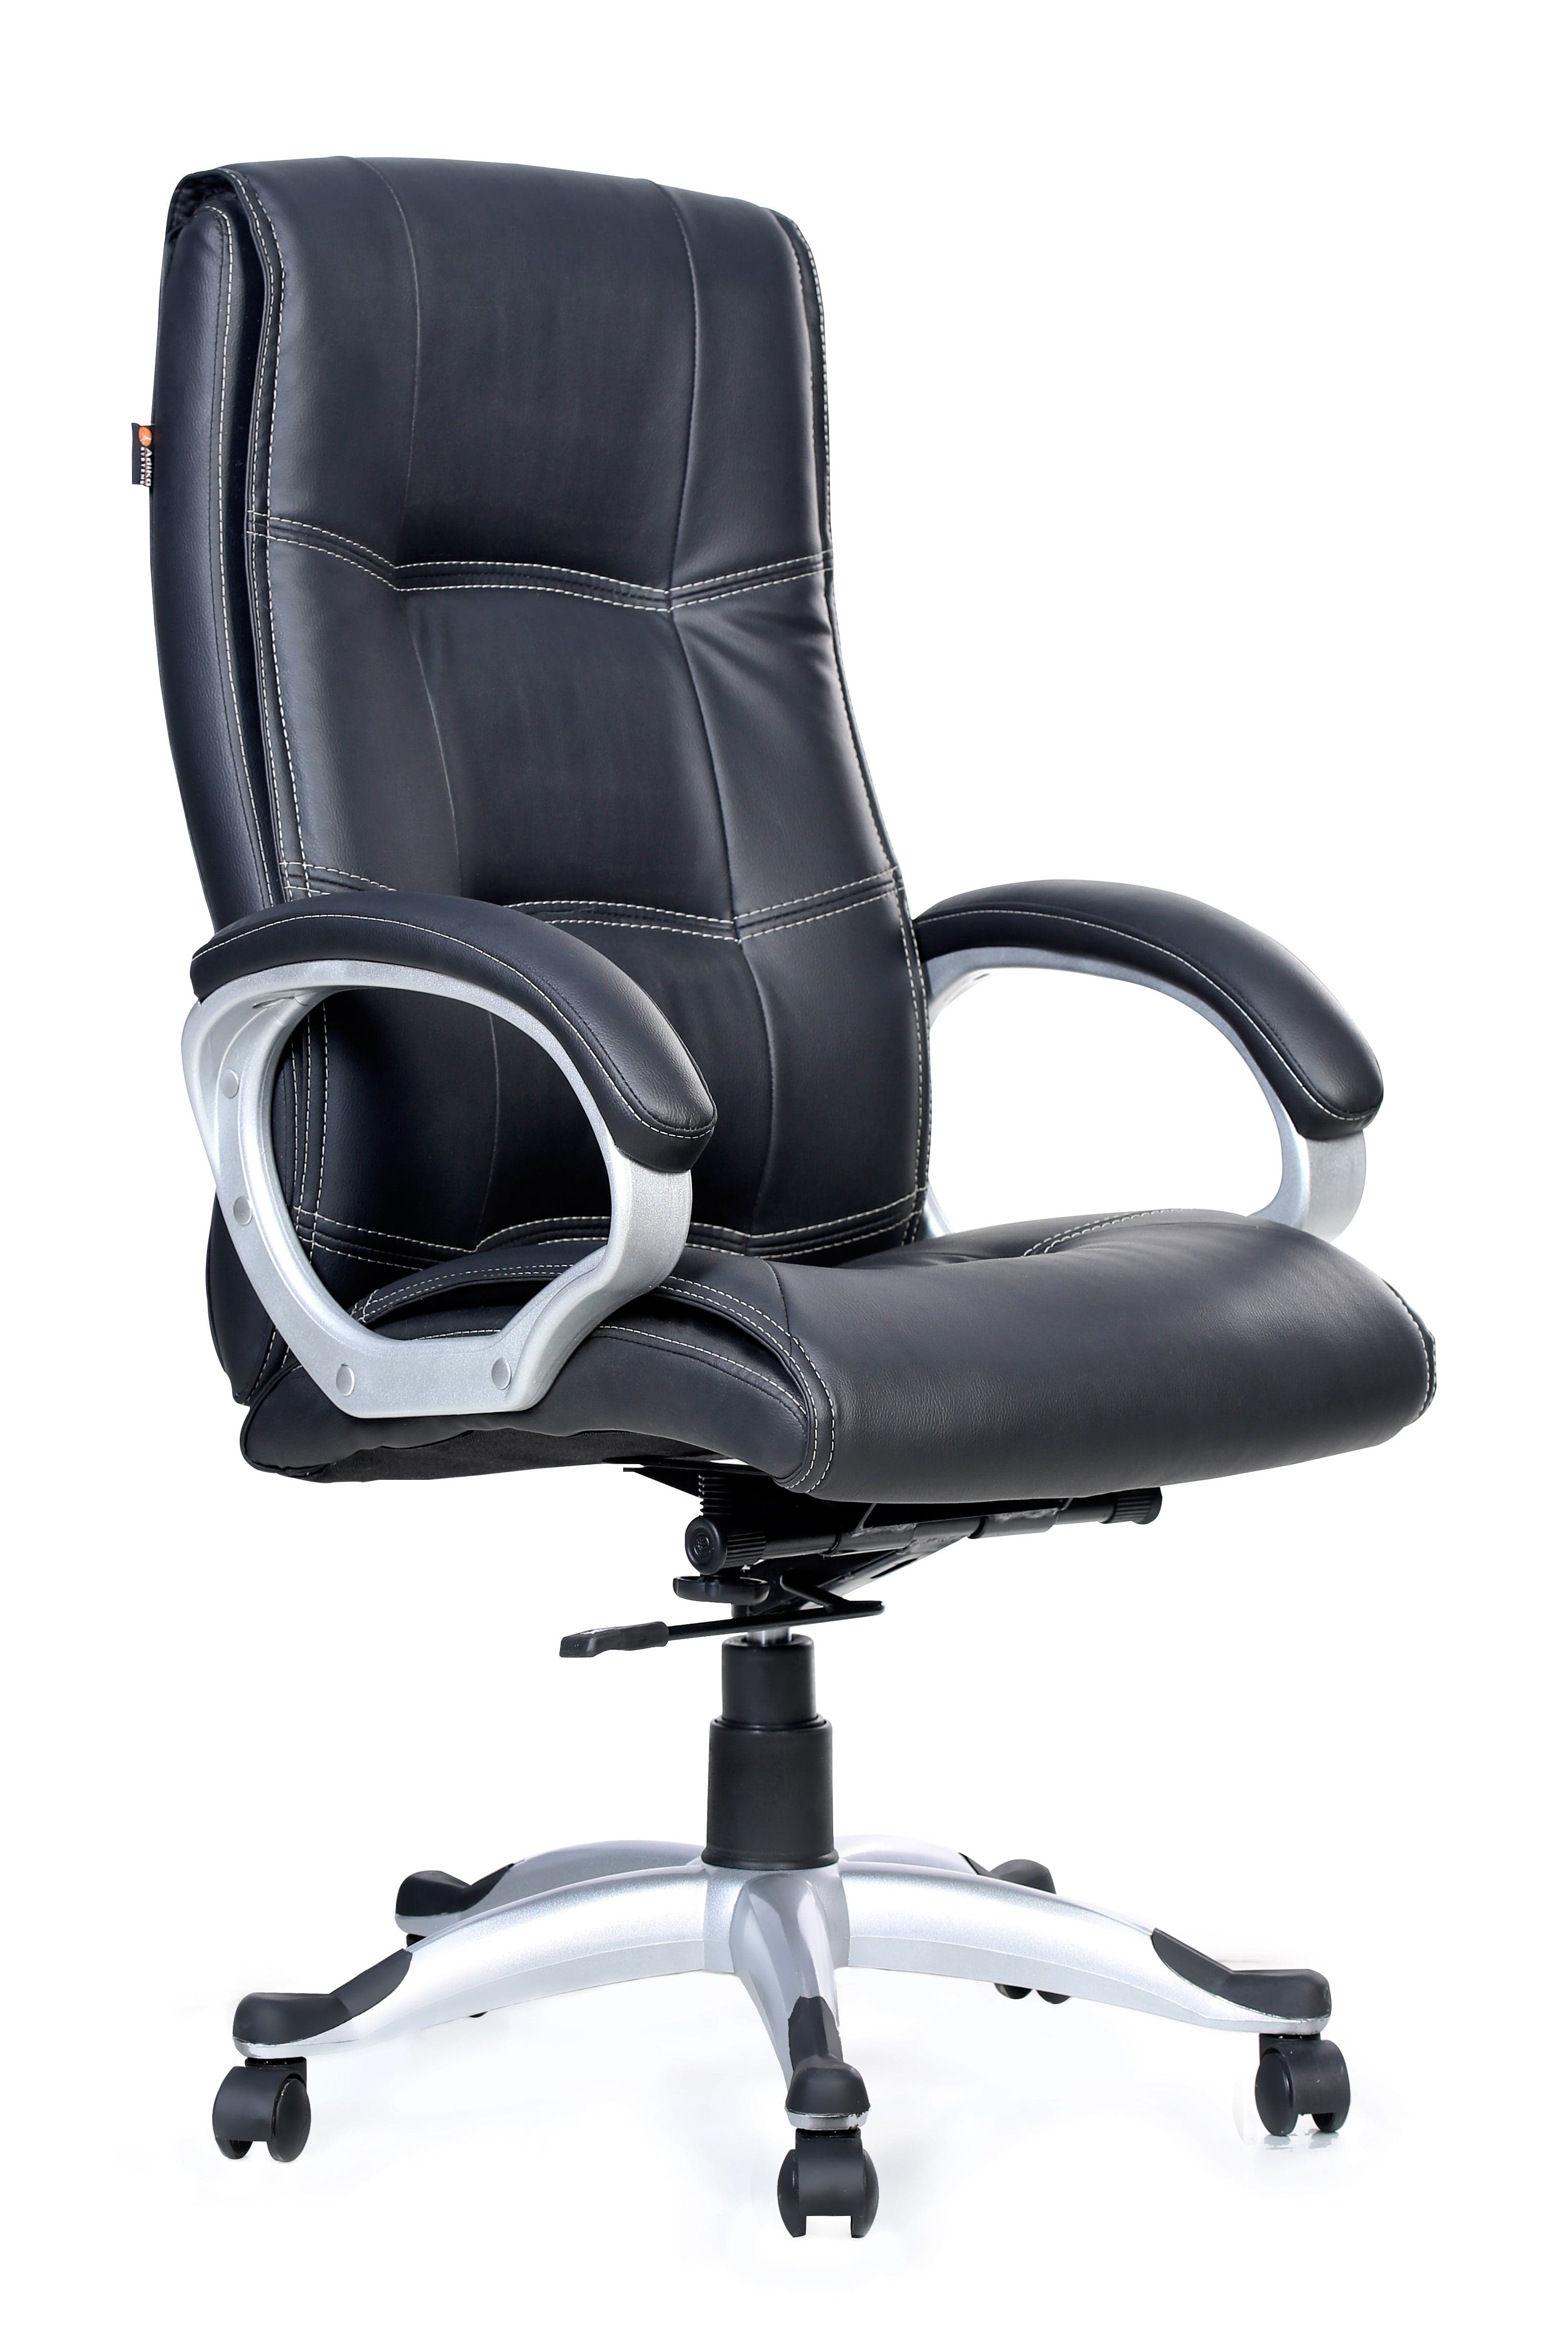 Executive Chair in Black Colour by Adiko Systems